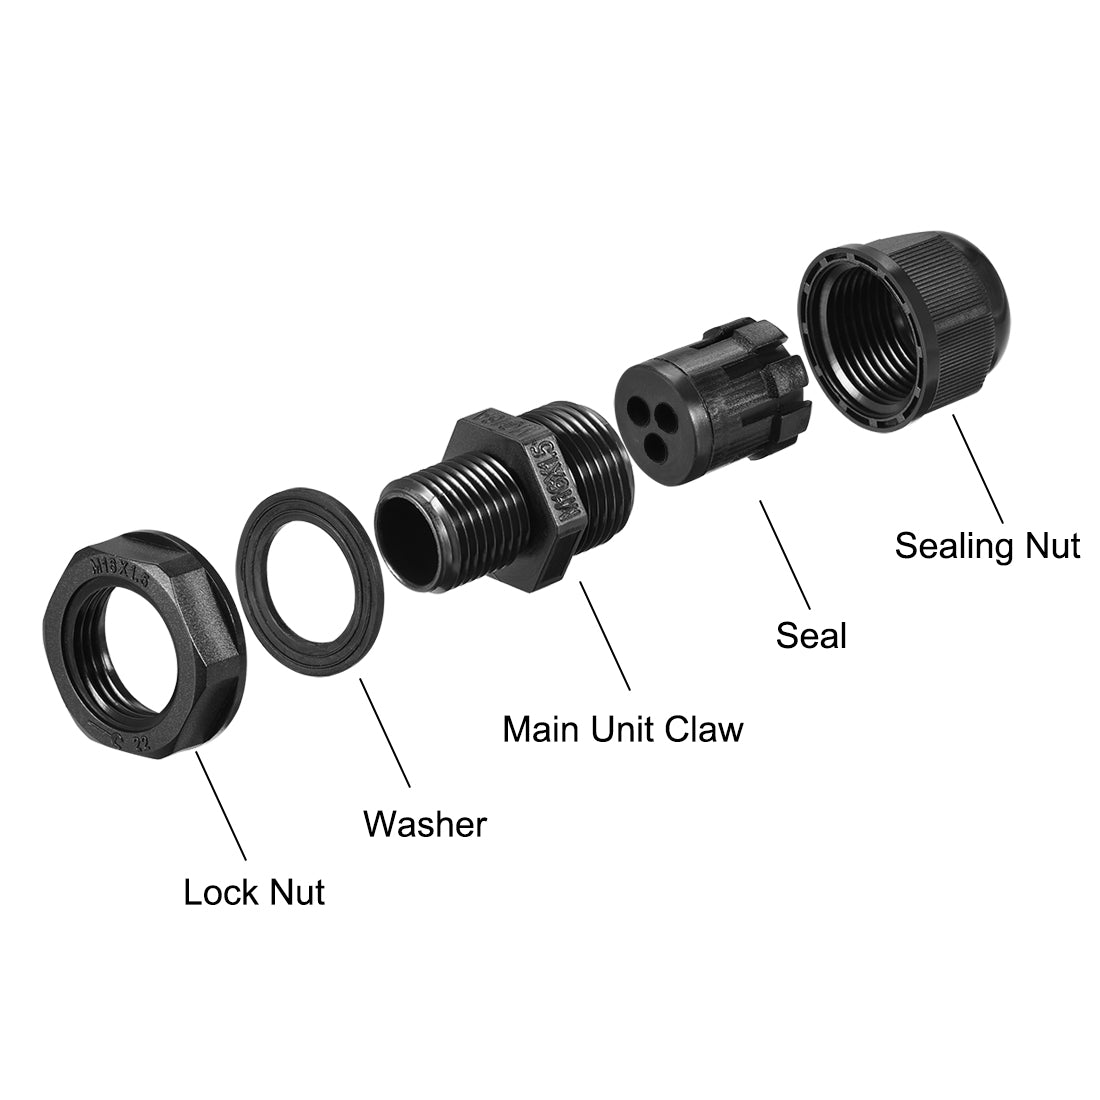 uxcell Uxcell M16 Cable Gland 3 Holes Waterproof IP68 Nylon Joint Adjustable Locknut for 3-4.2mm Dia Wire